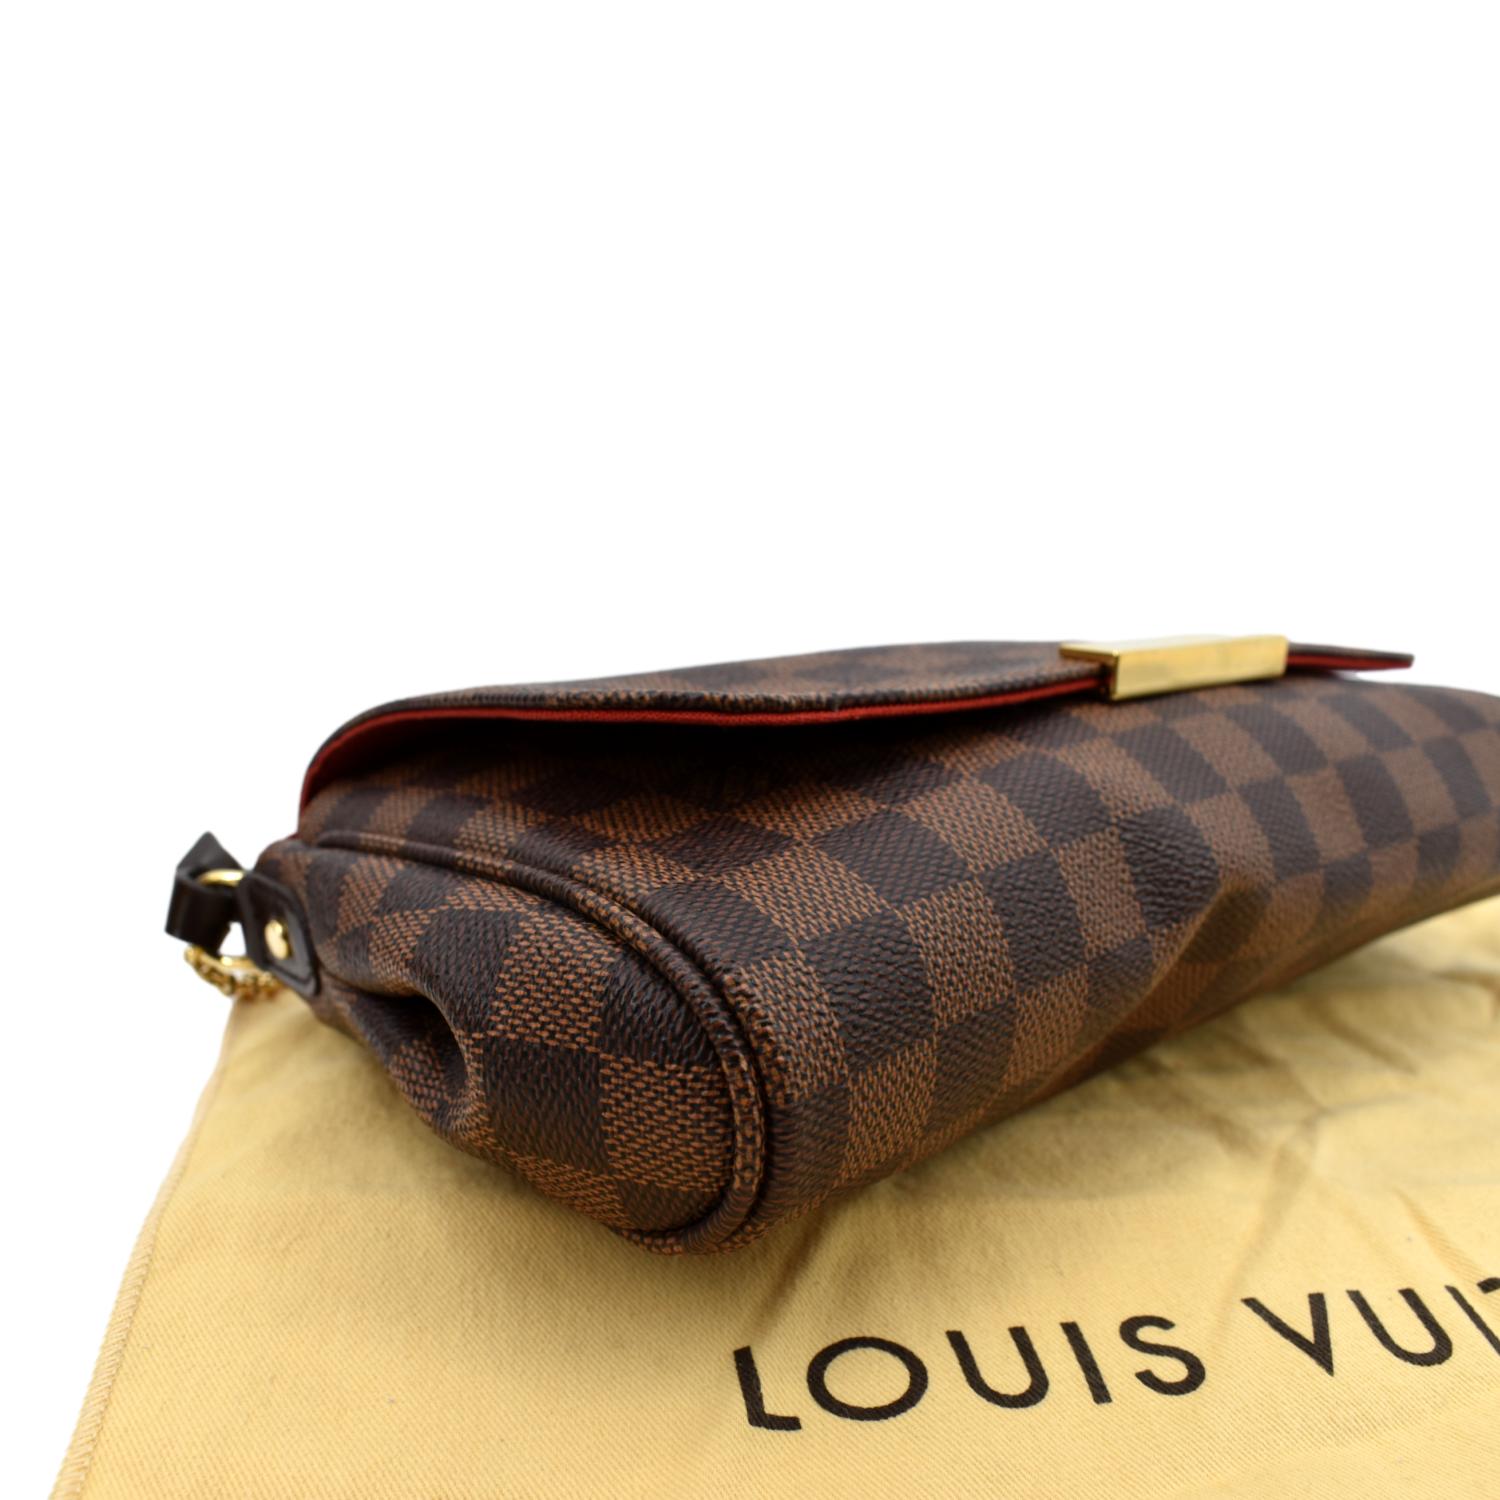 Louis Vuitton Favorite MM vs PM // Monogram vs Damier Ebene - Which is the  best one?? 